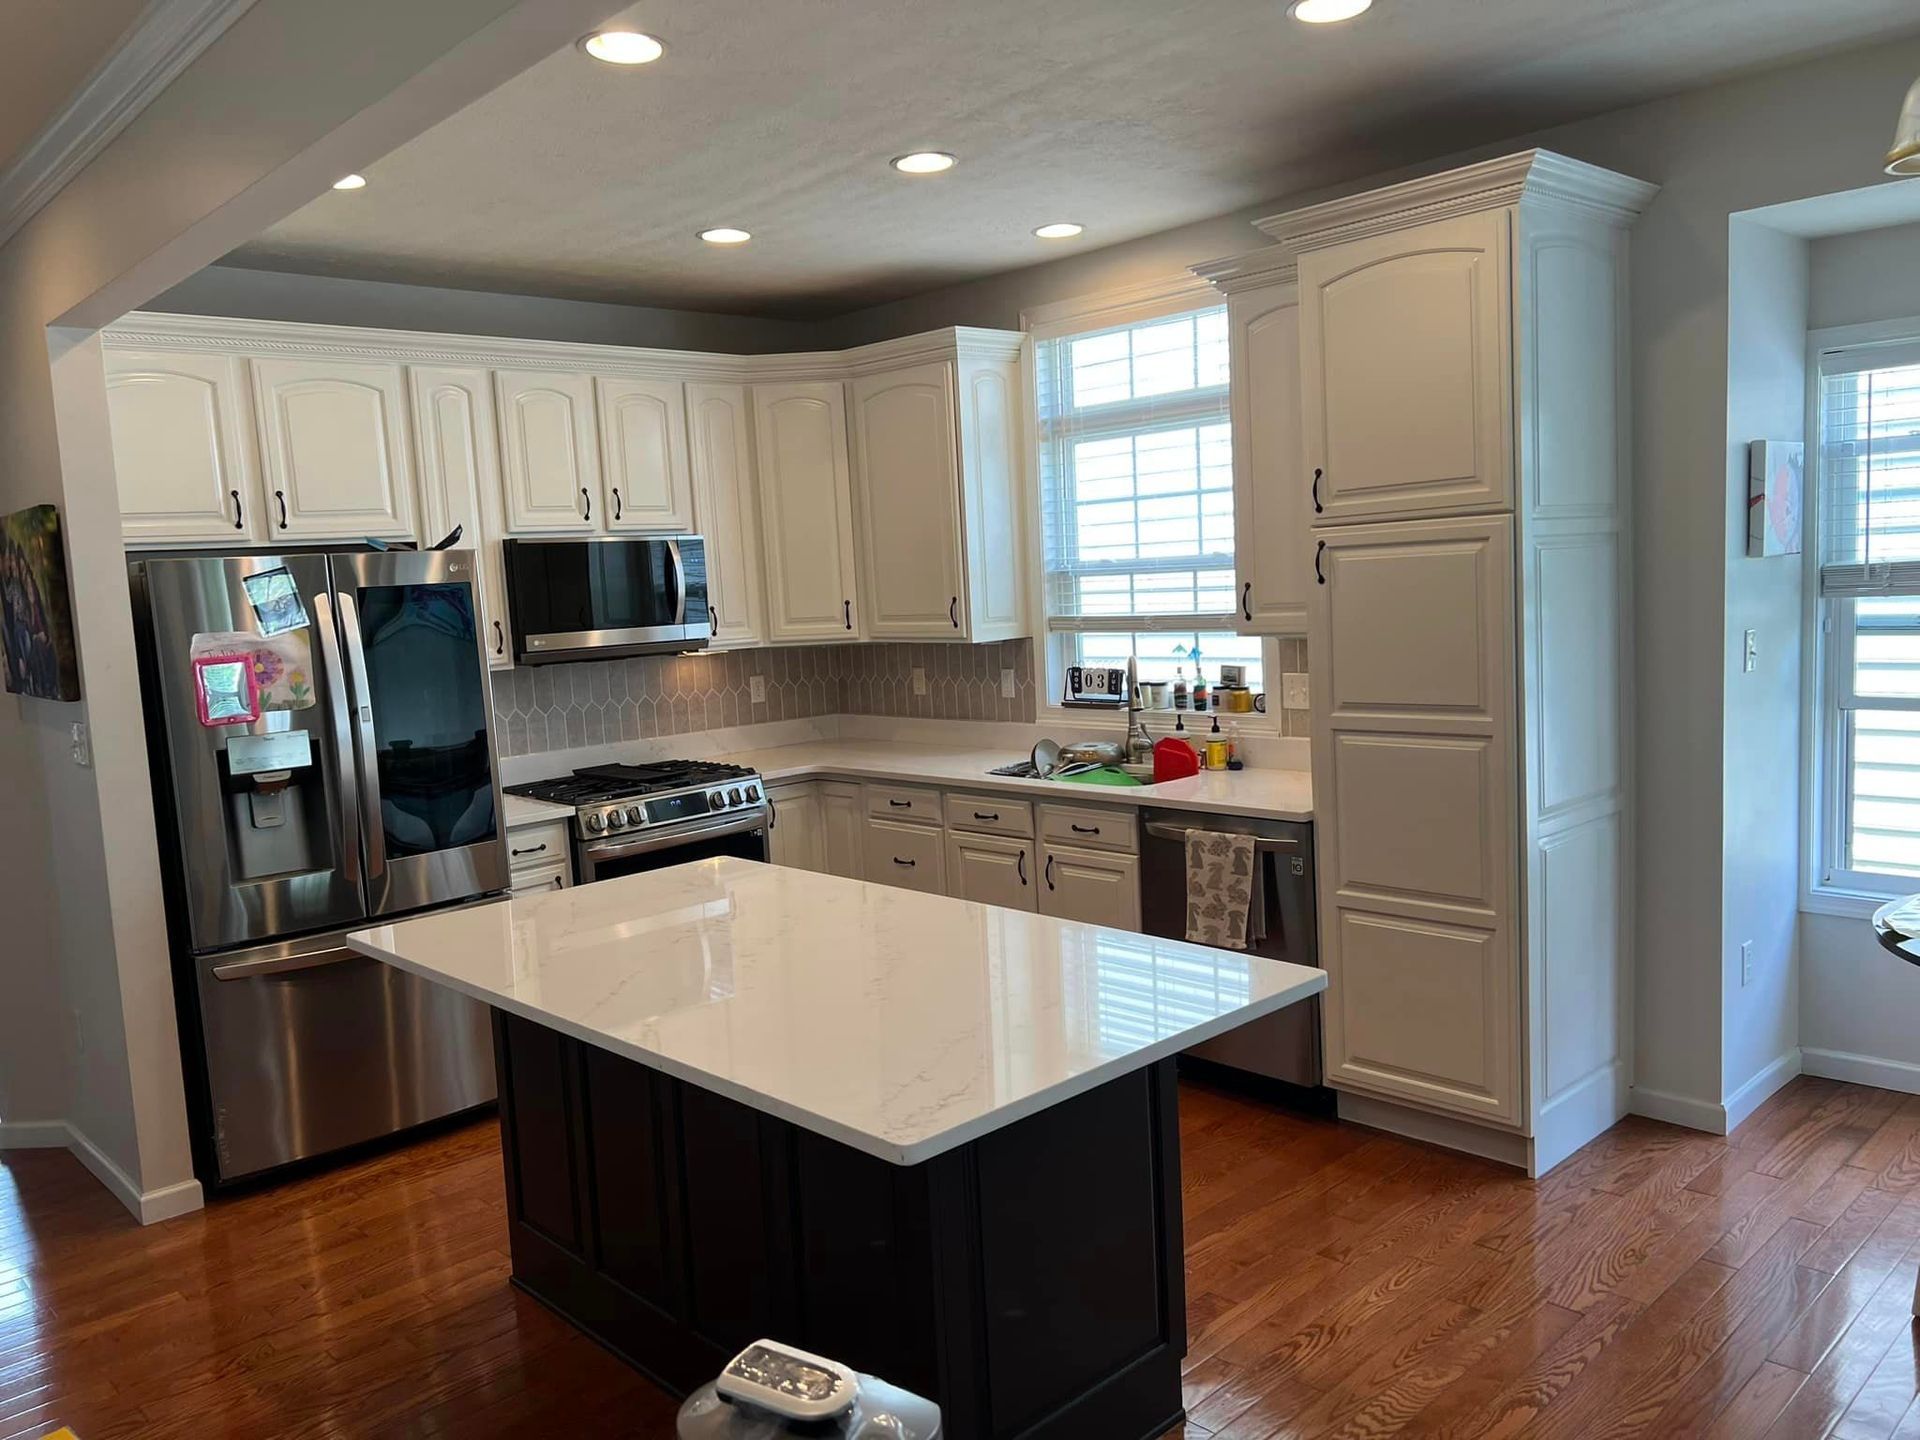 kitchen remodel with wood floors,  cream cabinets, and white granite countertops